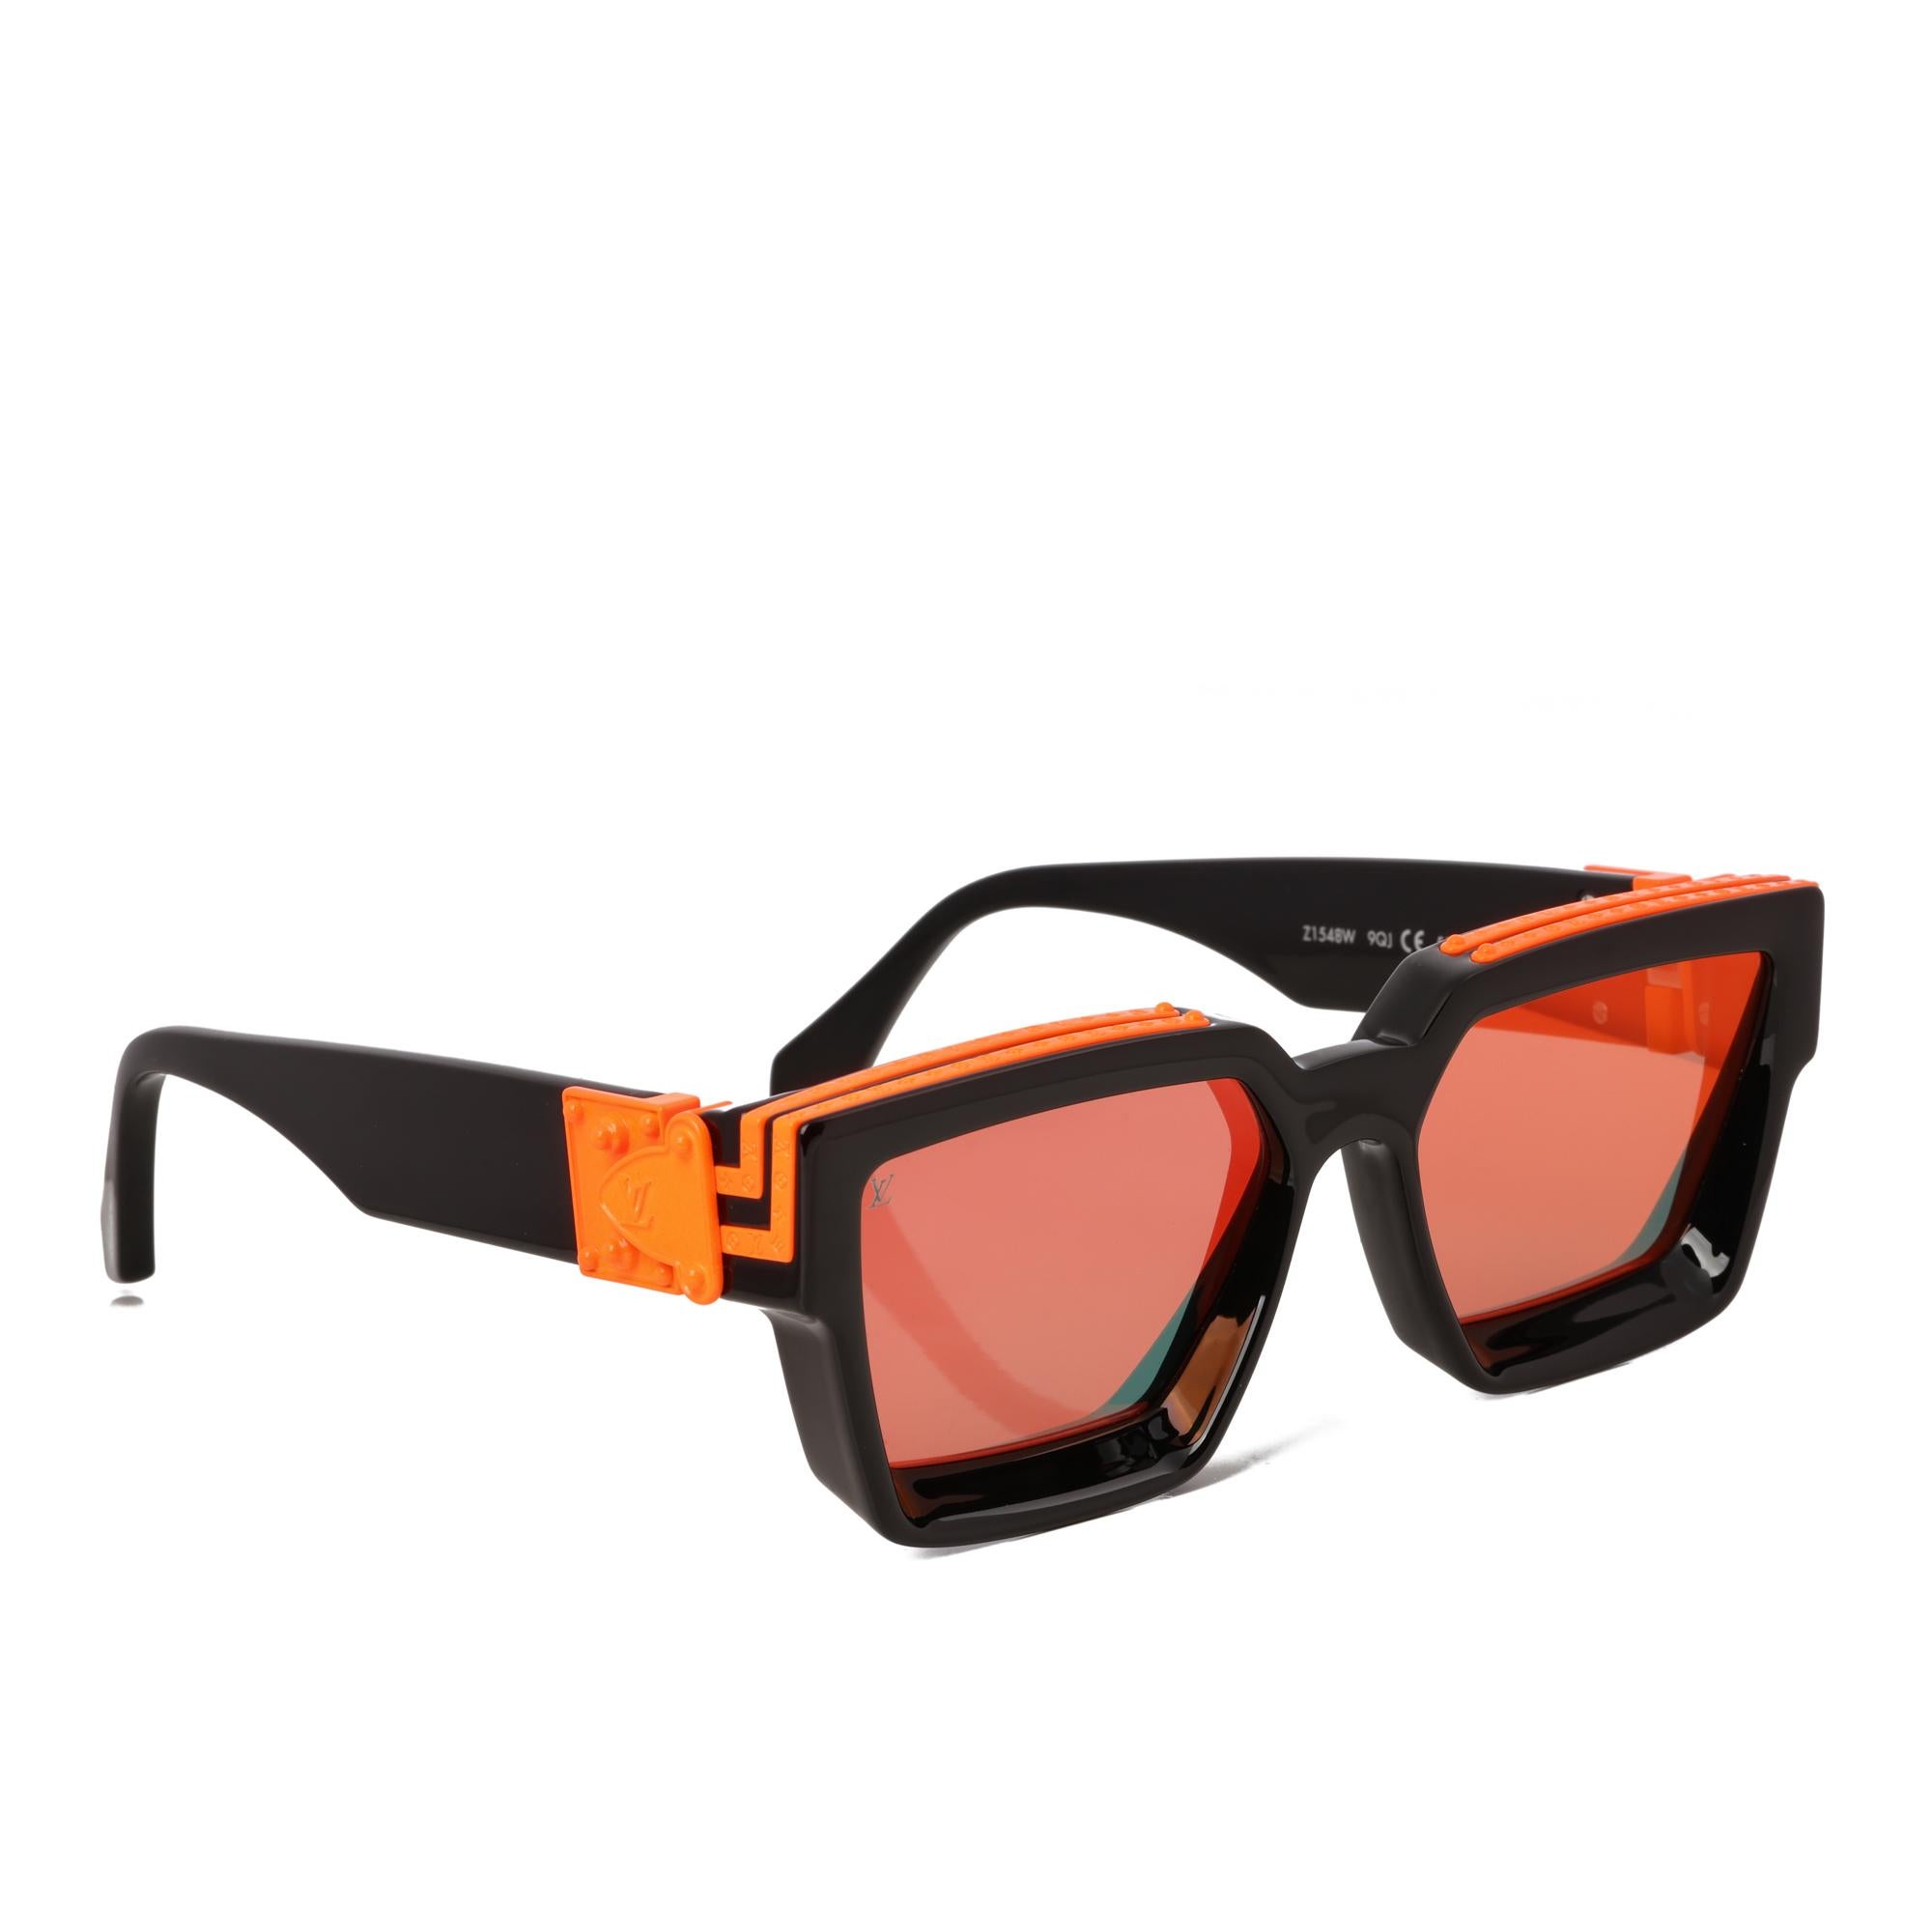 Louis Vuitton Black & Orange Acetate Mirrored 1.1 Millionaire Sunglasses - Size W

CONDITION NOTES
The exterior in is exceptional condition with no signs of use.
The hardware is in exceptional condition with minimal signs of use.
Overall this item